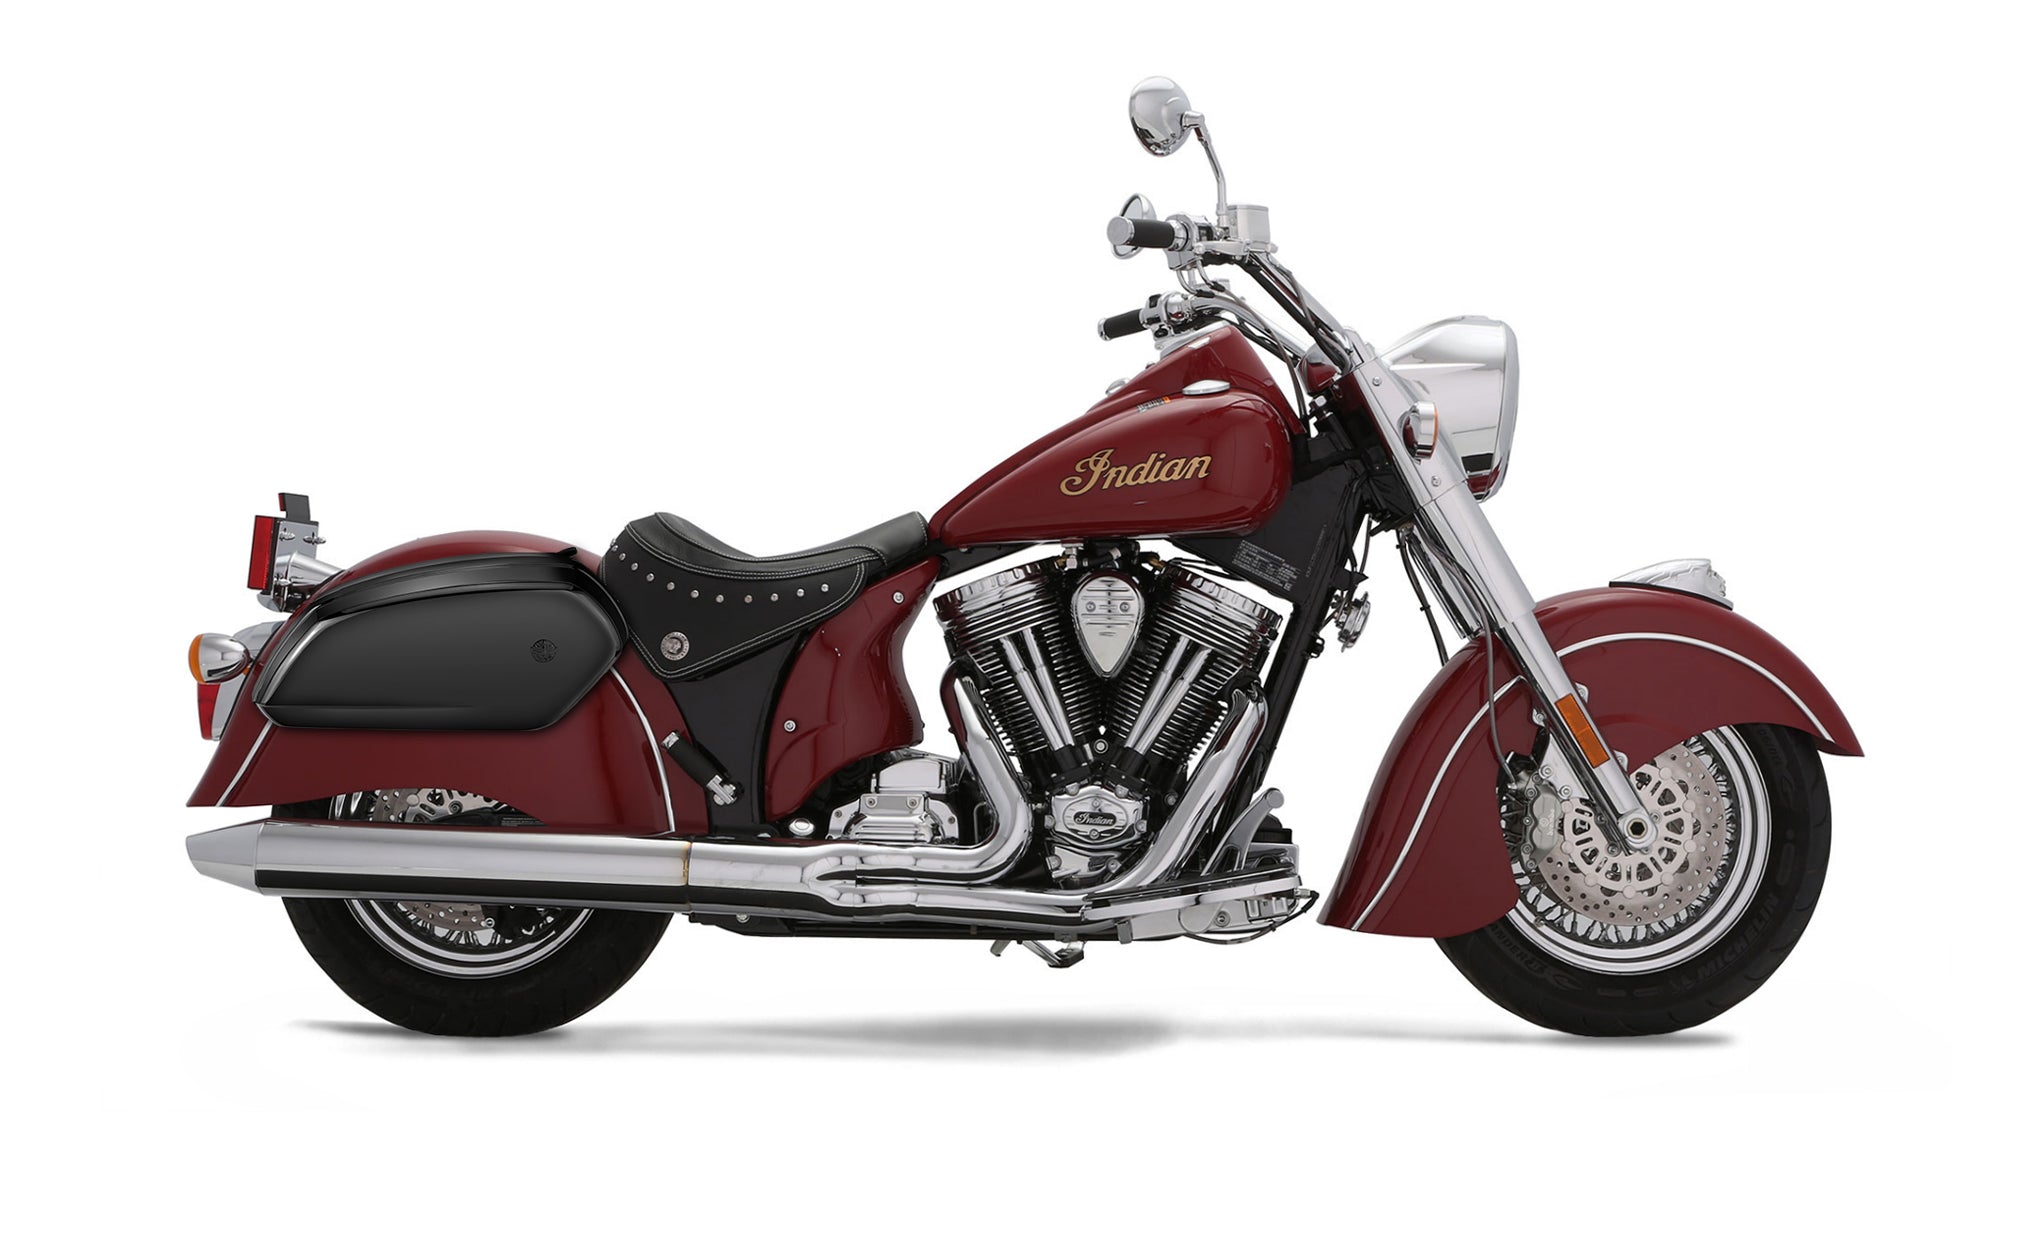 Viking Viper Large Indian Chief Deluxe Painted Motorcycle Hard Saddlebags Engineering Excellence with Bag on Bike @expand